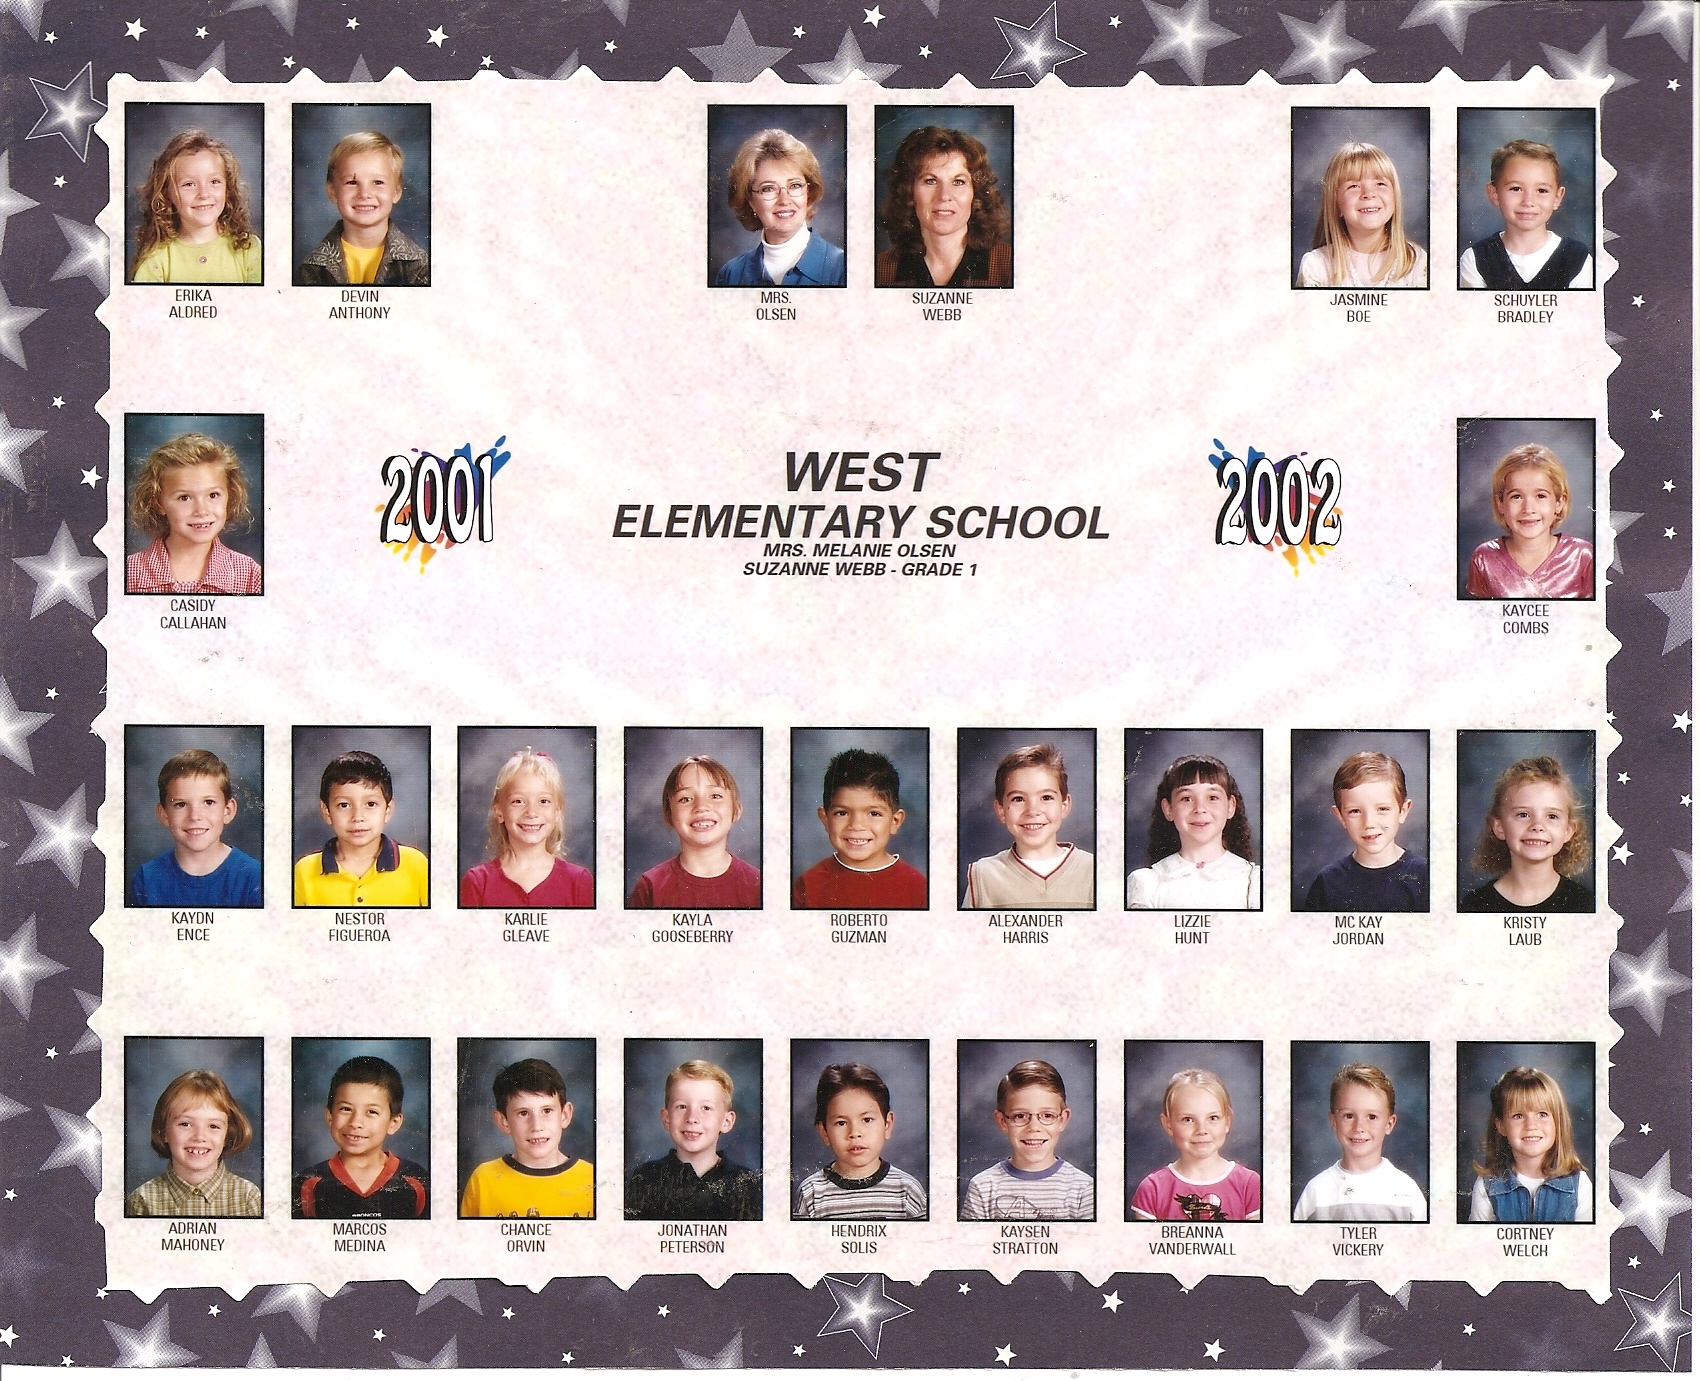 Mrs. Suzanne Webb's 2001-2002 first grade class at West Elementary School